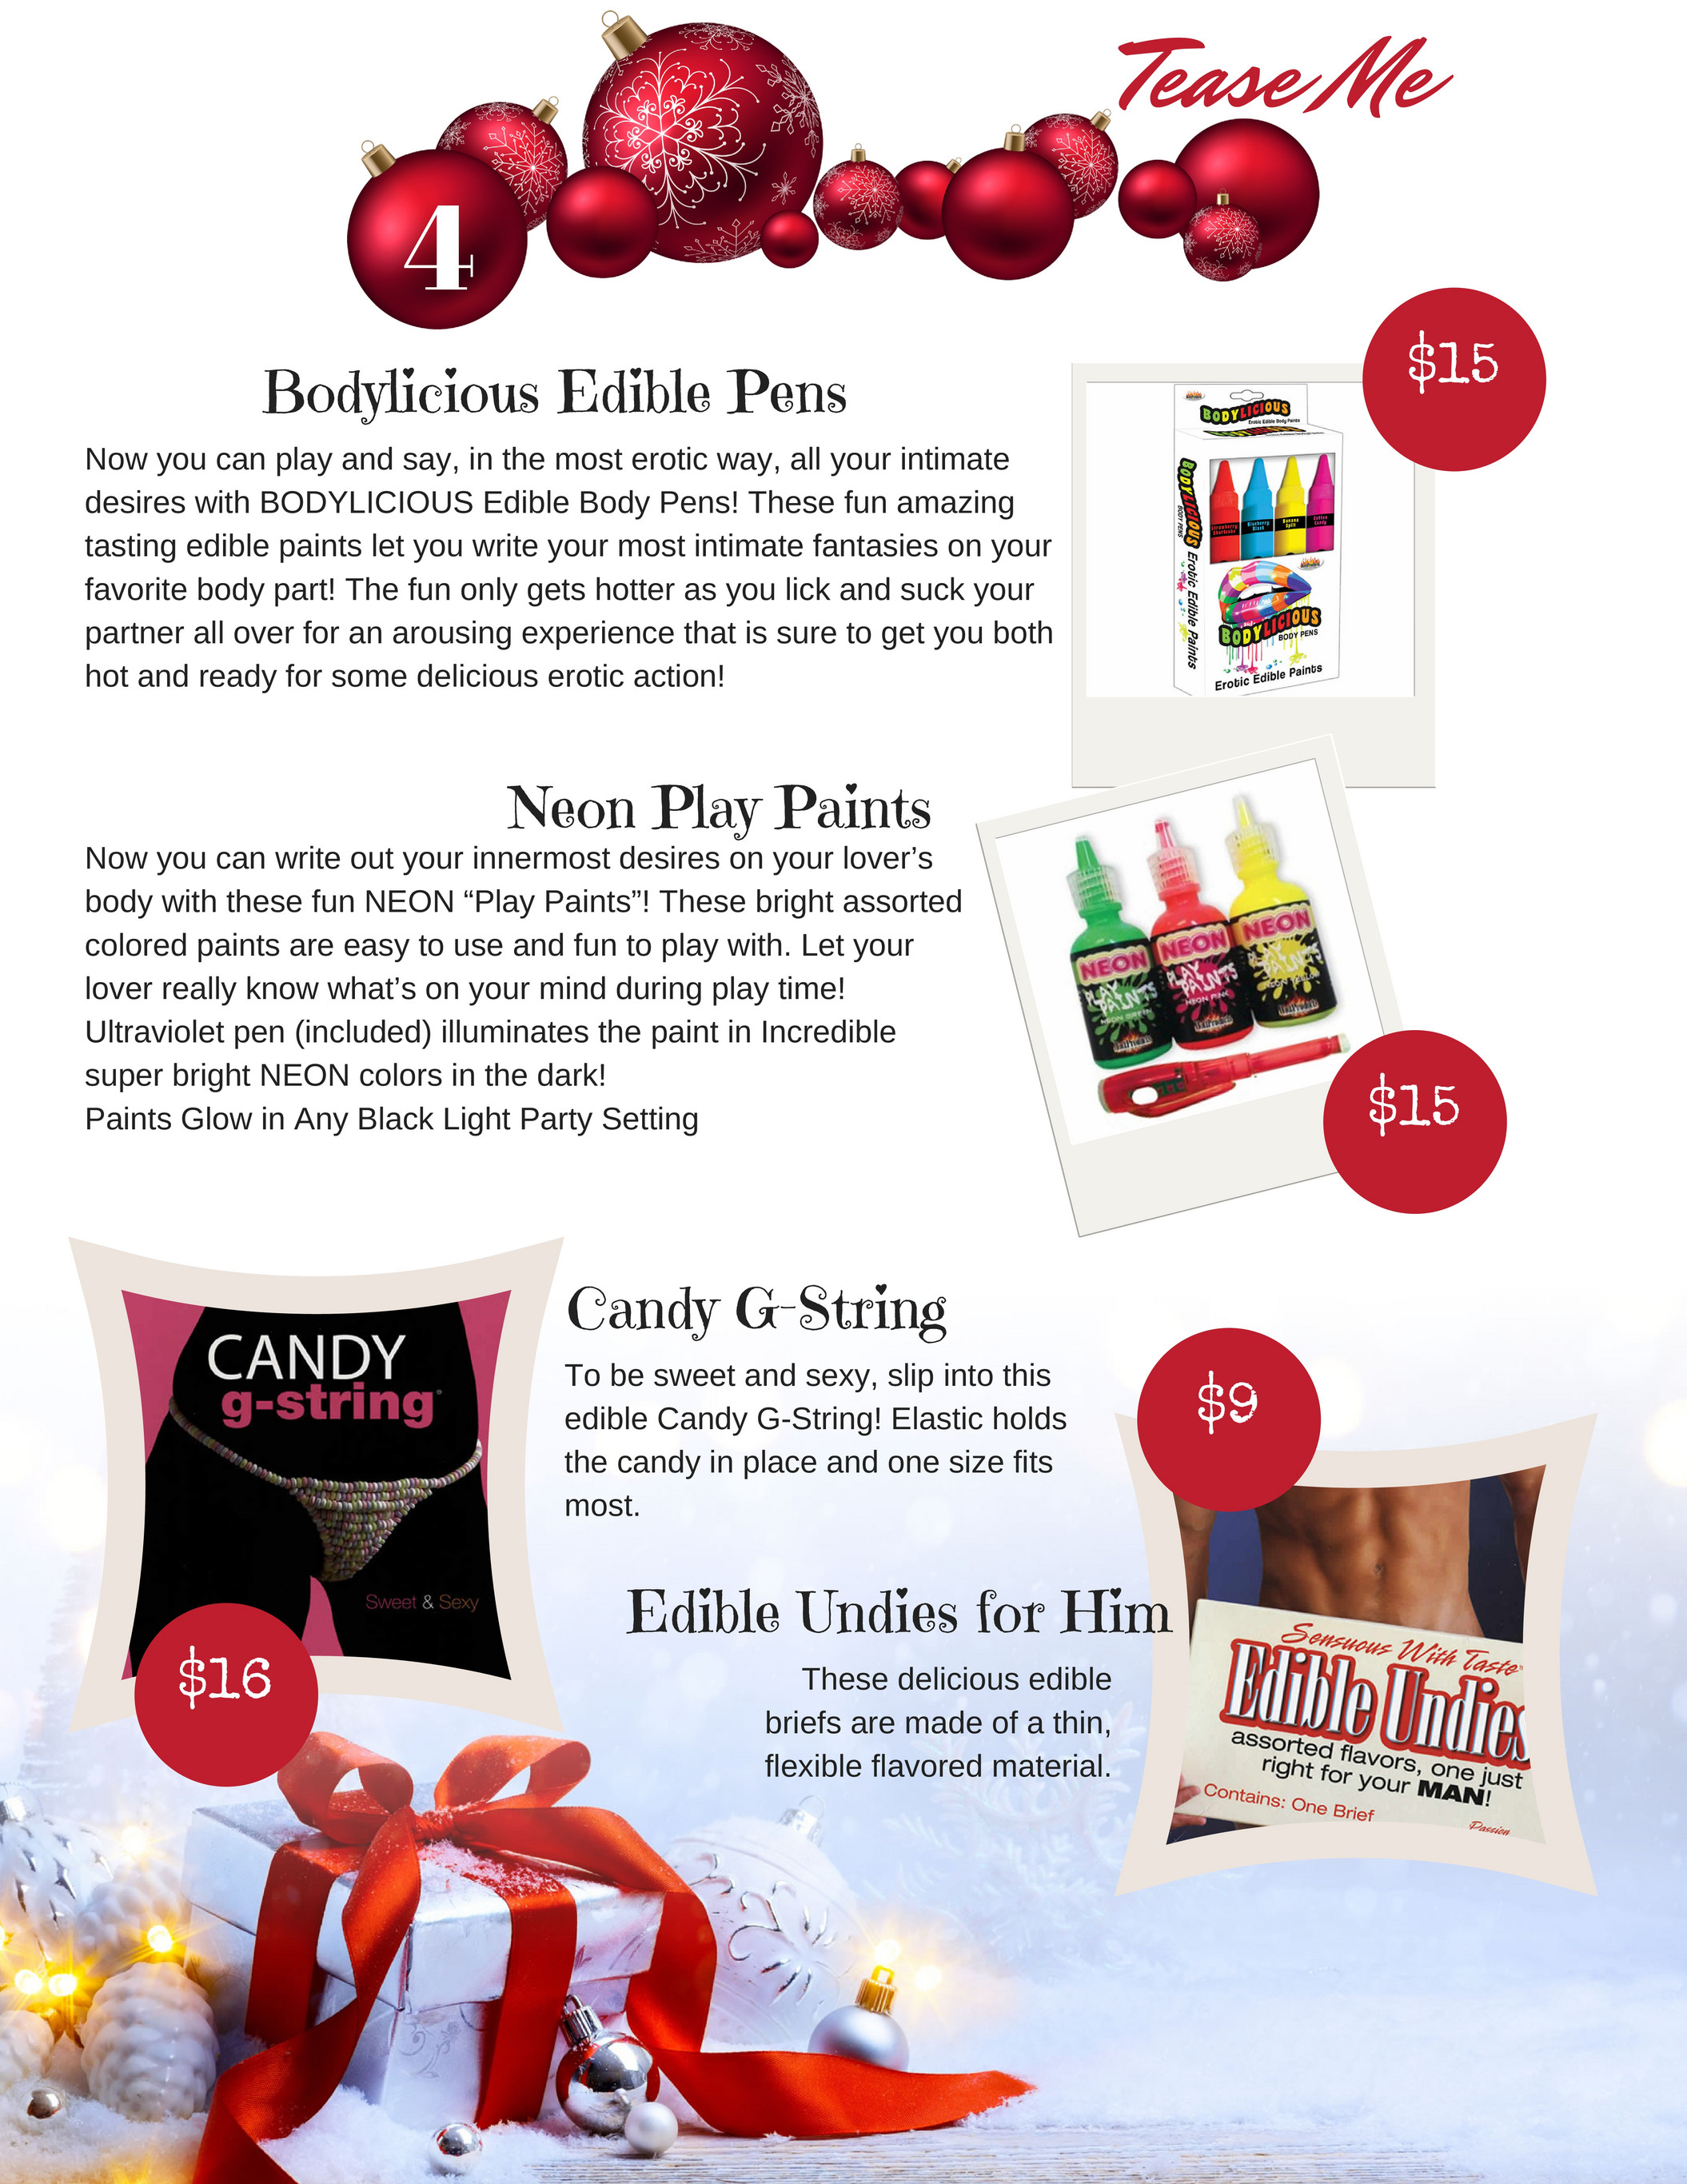 Bodylicious Body Pens Erotic Edible Body Paints Assorted Flavors And Colors  4 Each Per Pack 